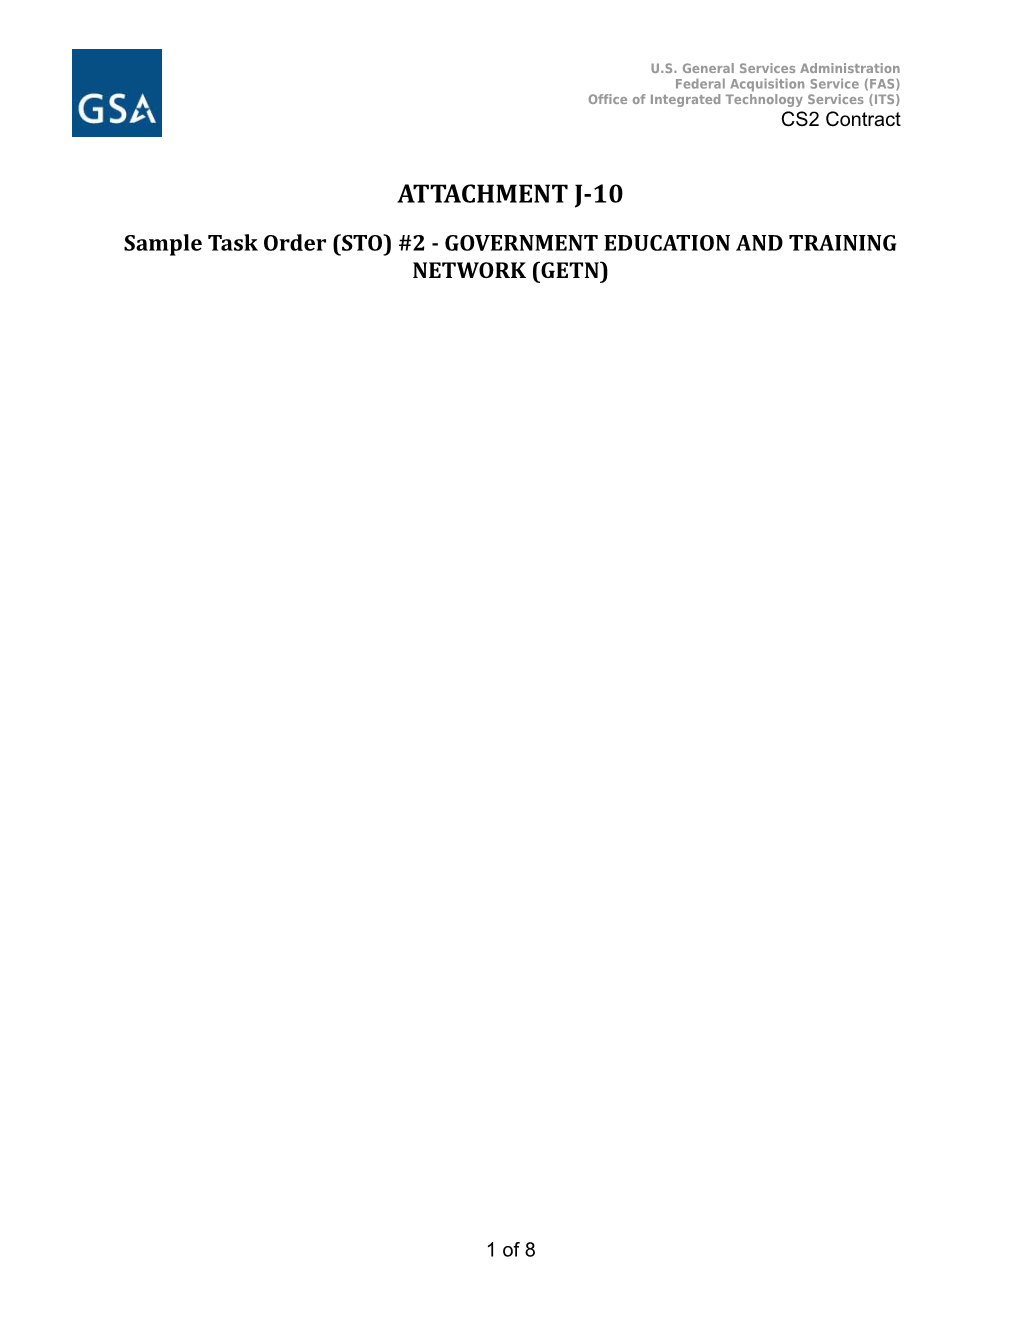 Sample Task Order (STO) #2 - GOVERNMENT EDUCATION and TRAINING NETWORK (GETN)